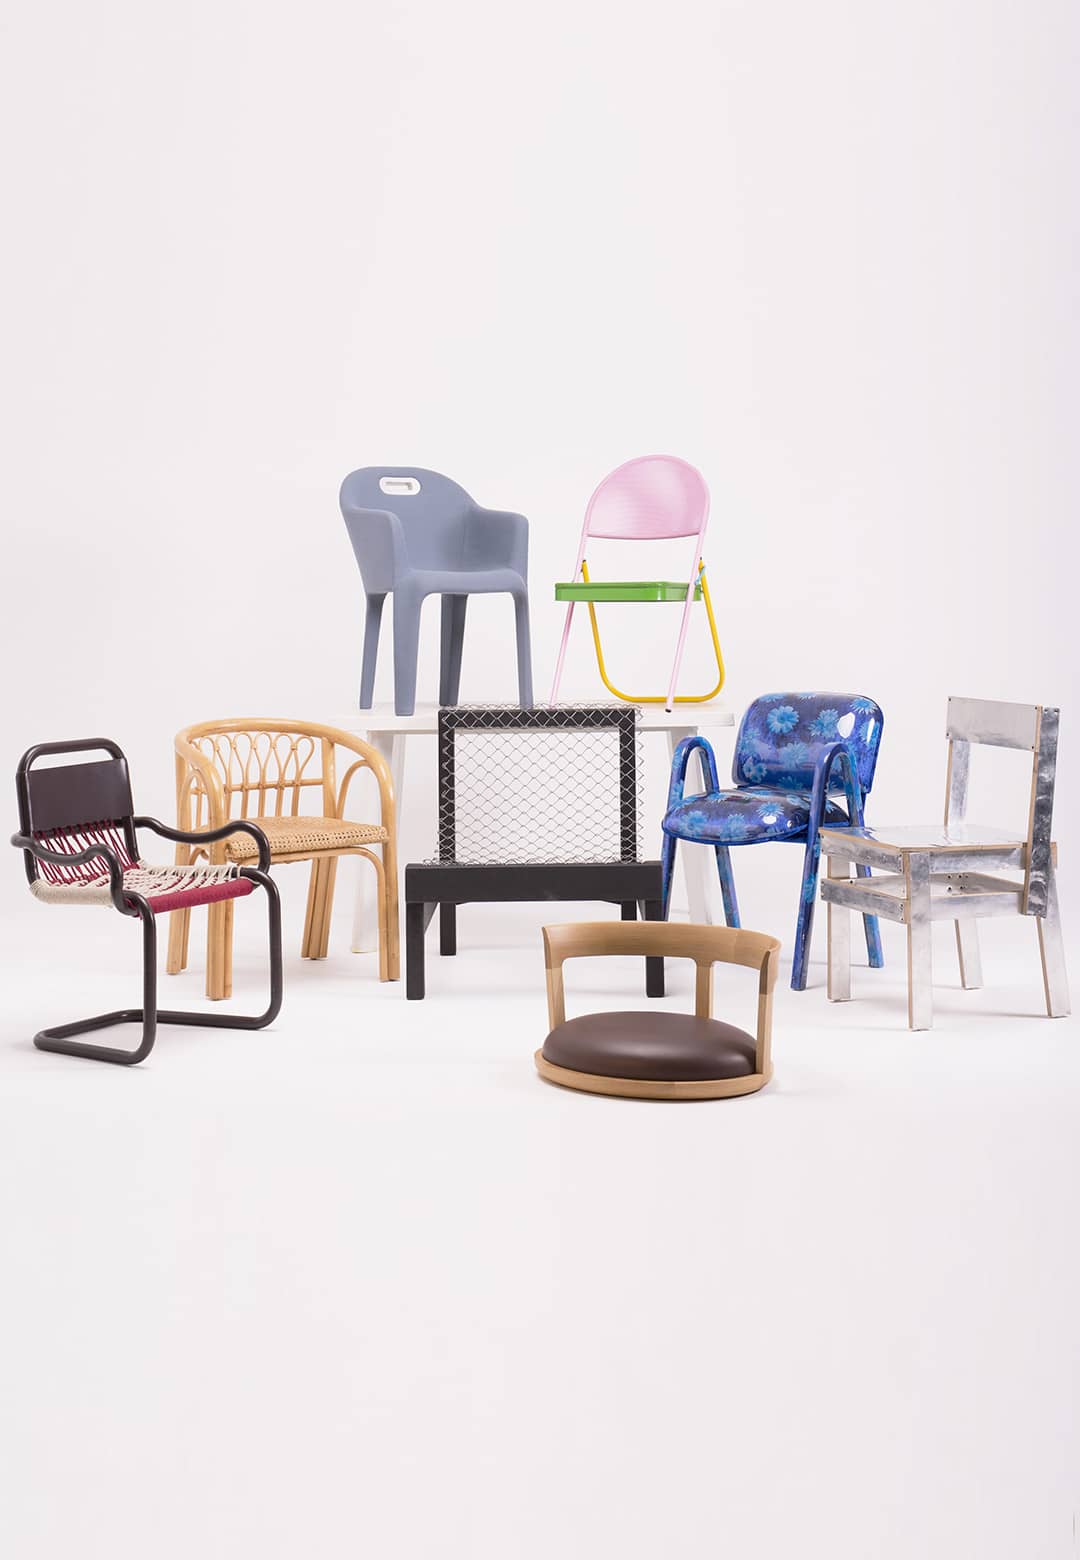 Cross Cultural Chairs on diversifying modern seating at Salone del Mobile 2021